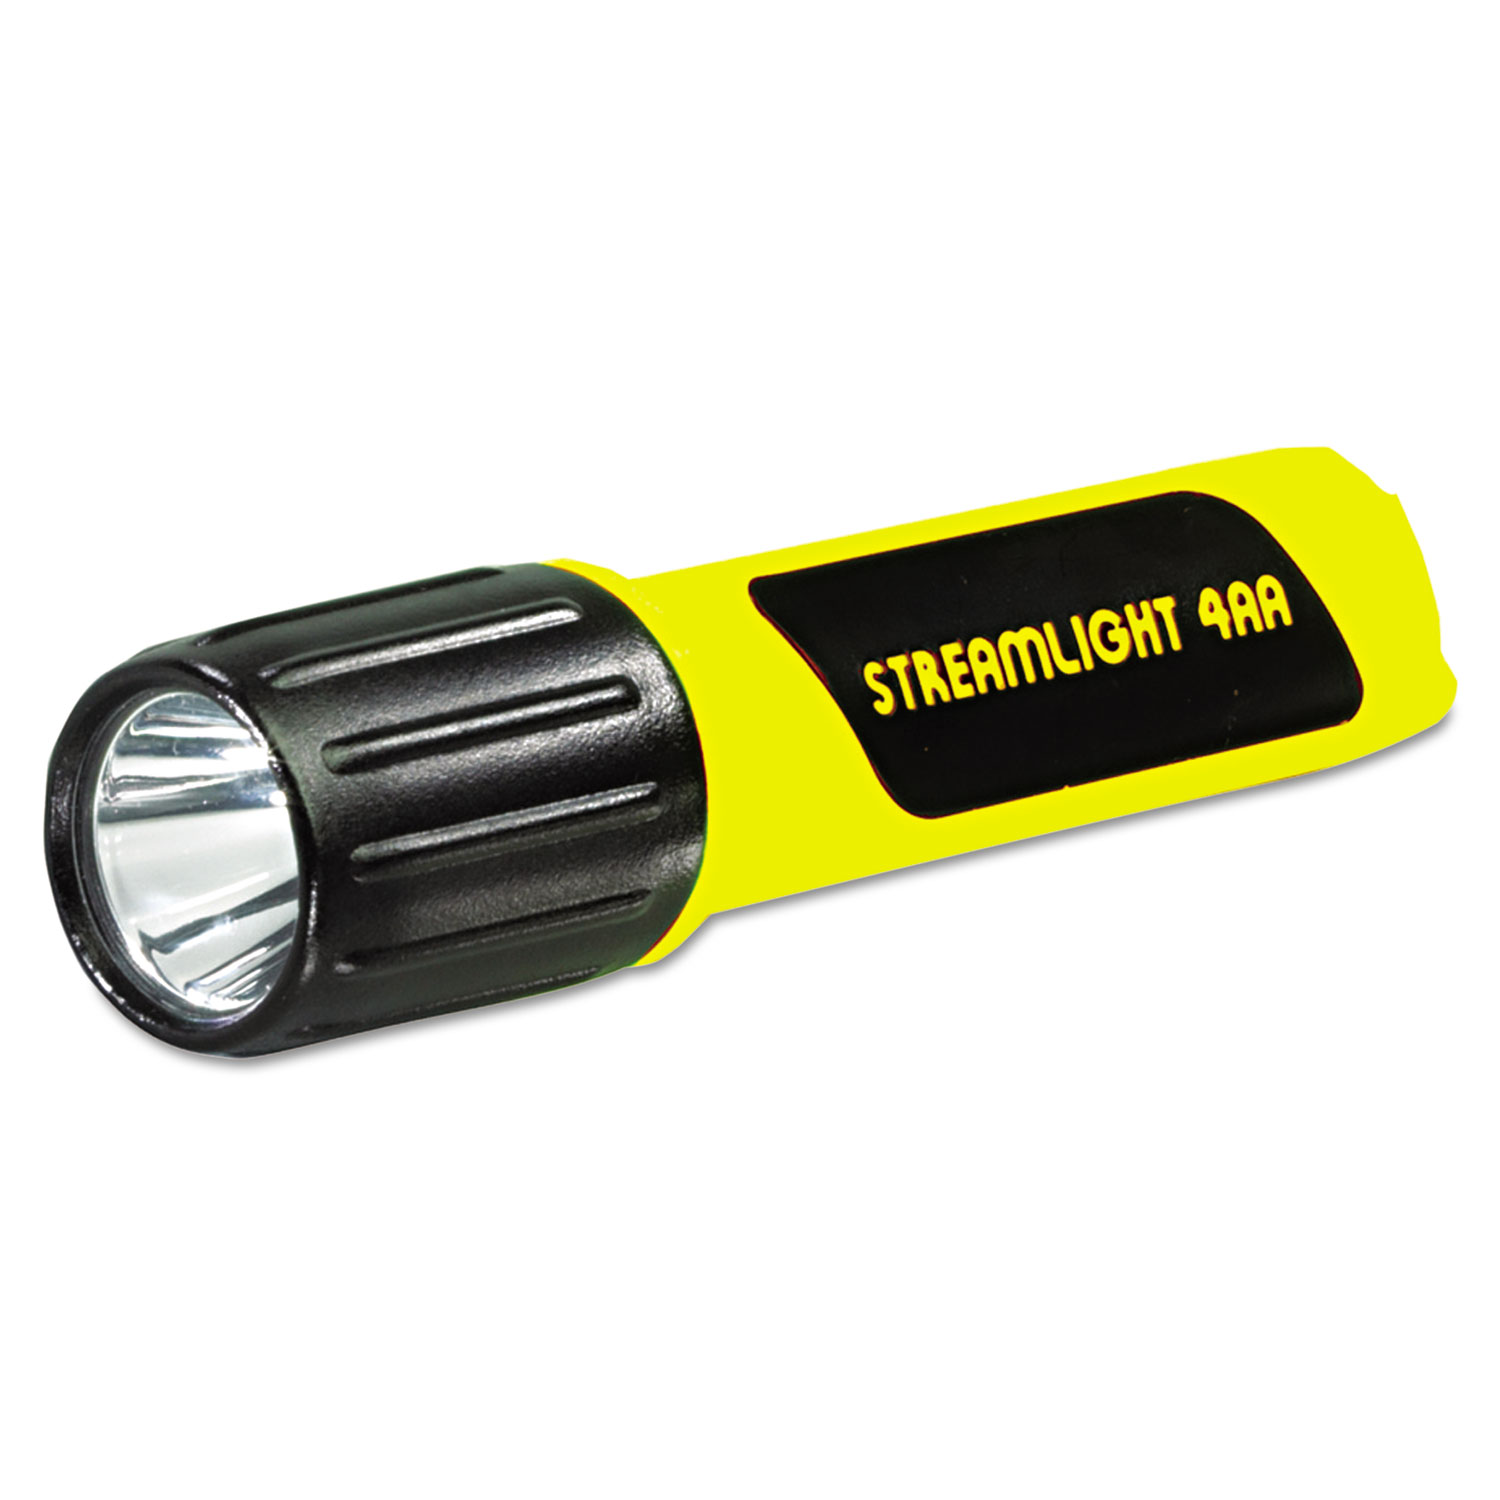  Streamlight 68602 ProPolymer Lux LED Flashlight, 4 AA Batteries (Included), Yellow (LGT68602) 